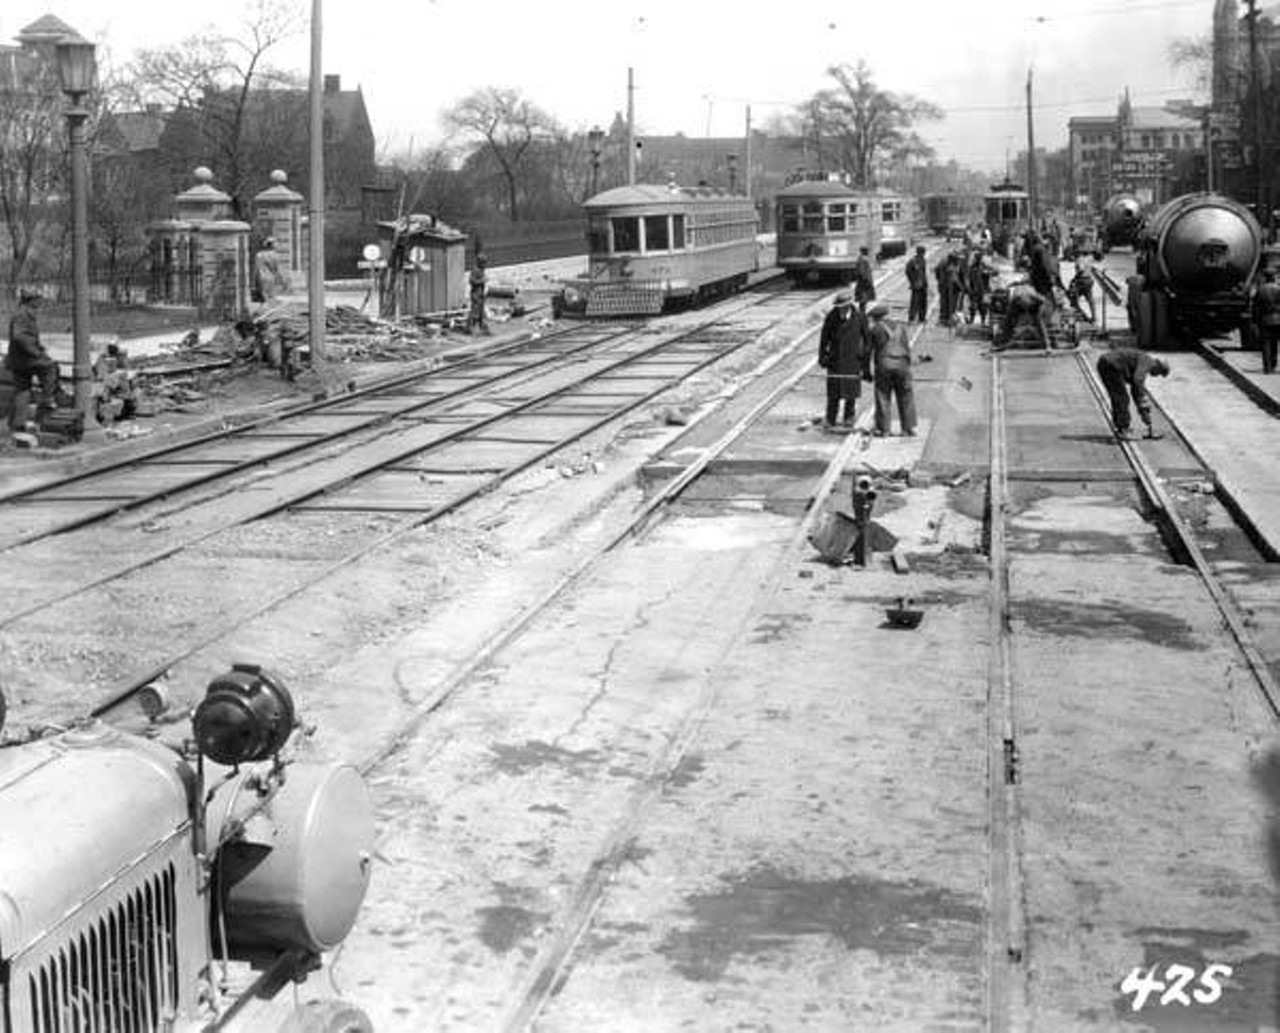 Cleveland Railway Co. doing repairs at 2600 Euclid Ave., 1933